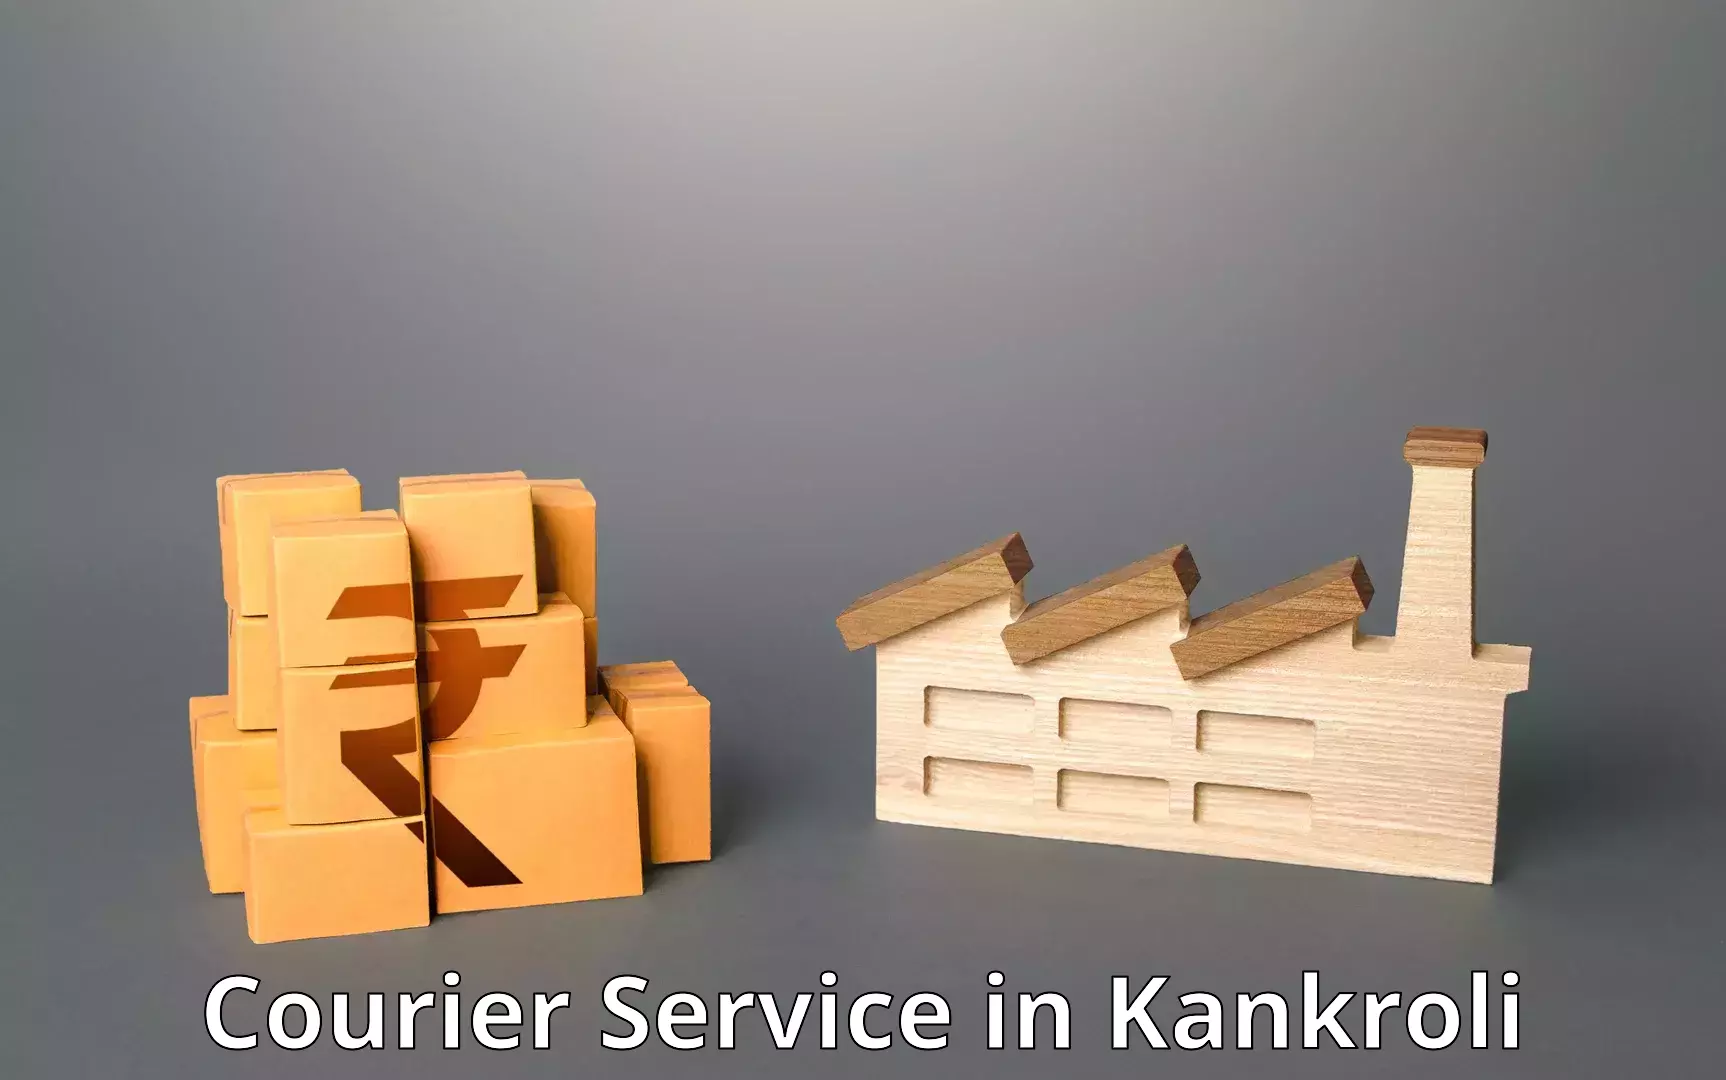 Customer-oriented courier services in Kankroli